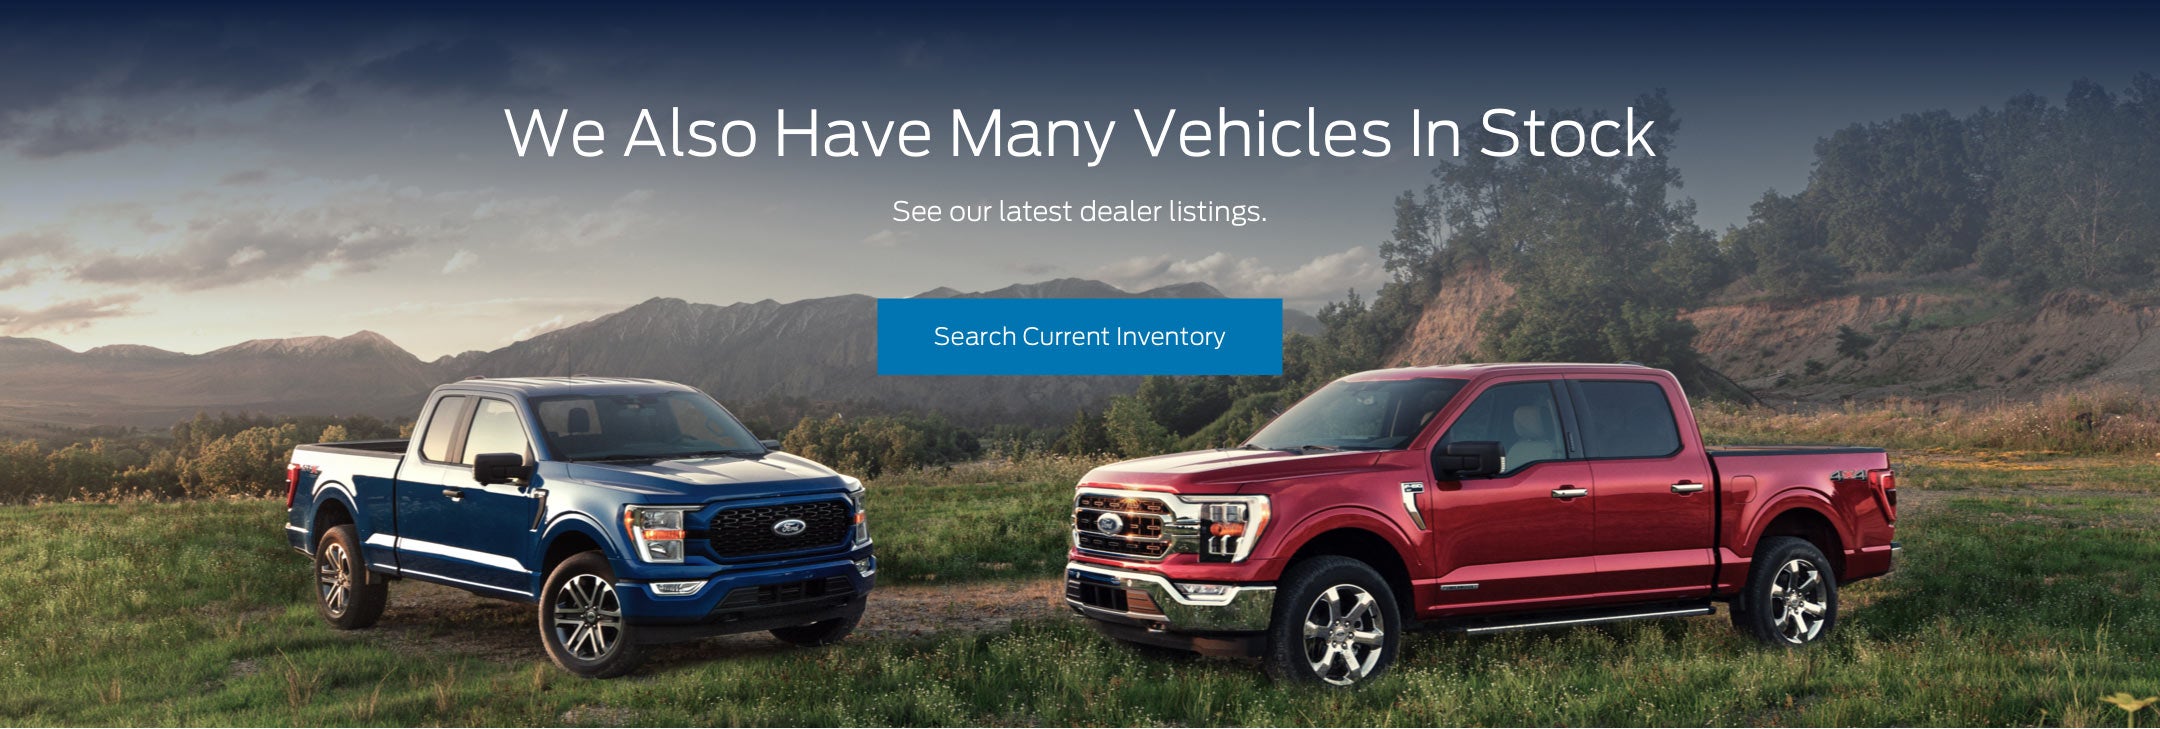 Ford vehicles in stock | George Wall Ford in Red Bank NJ